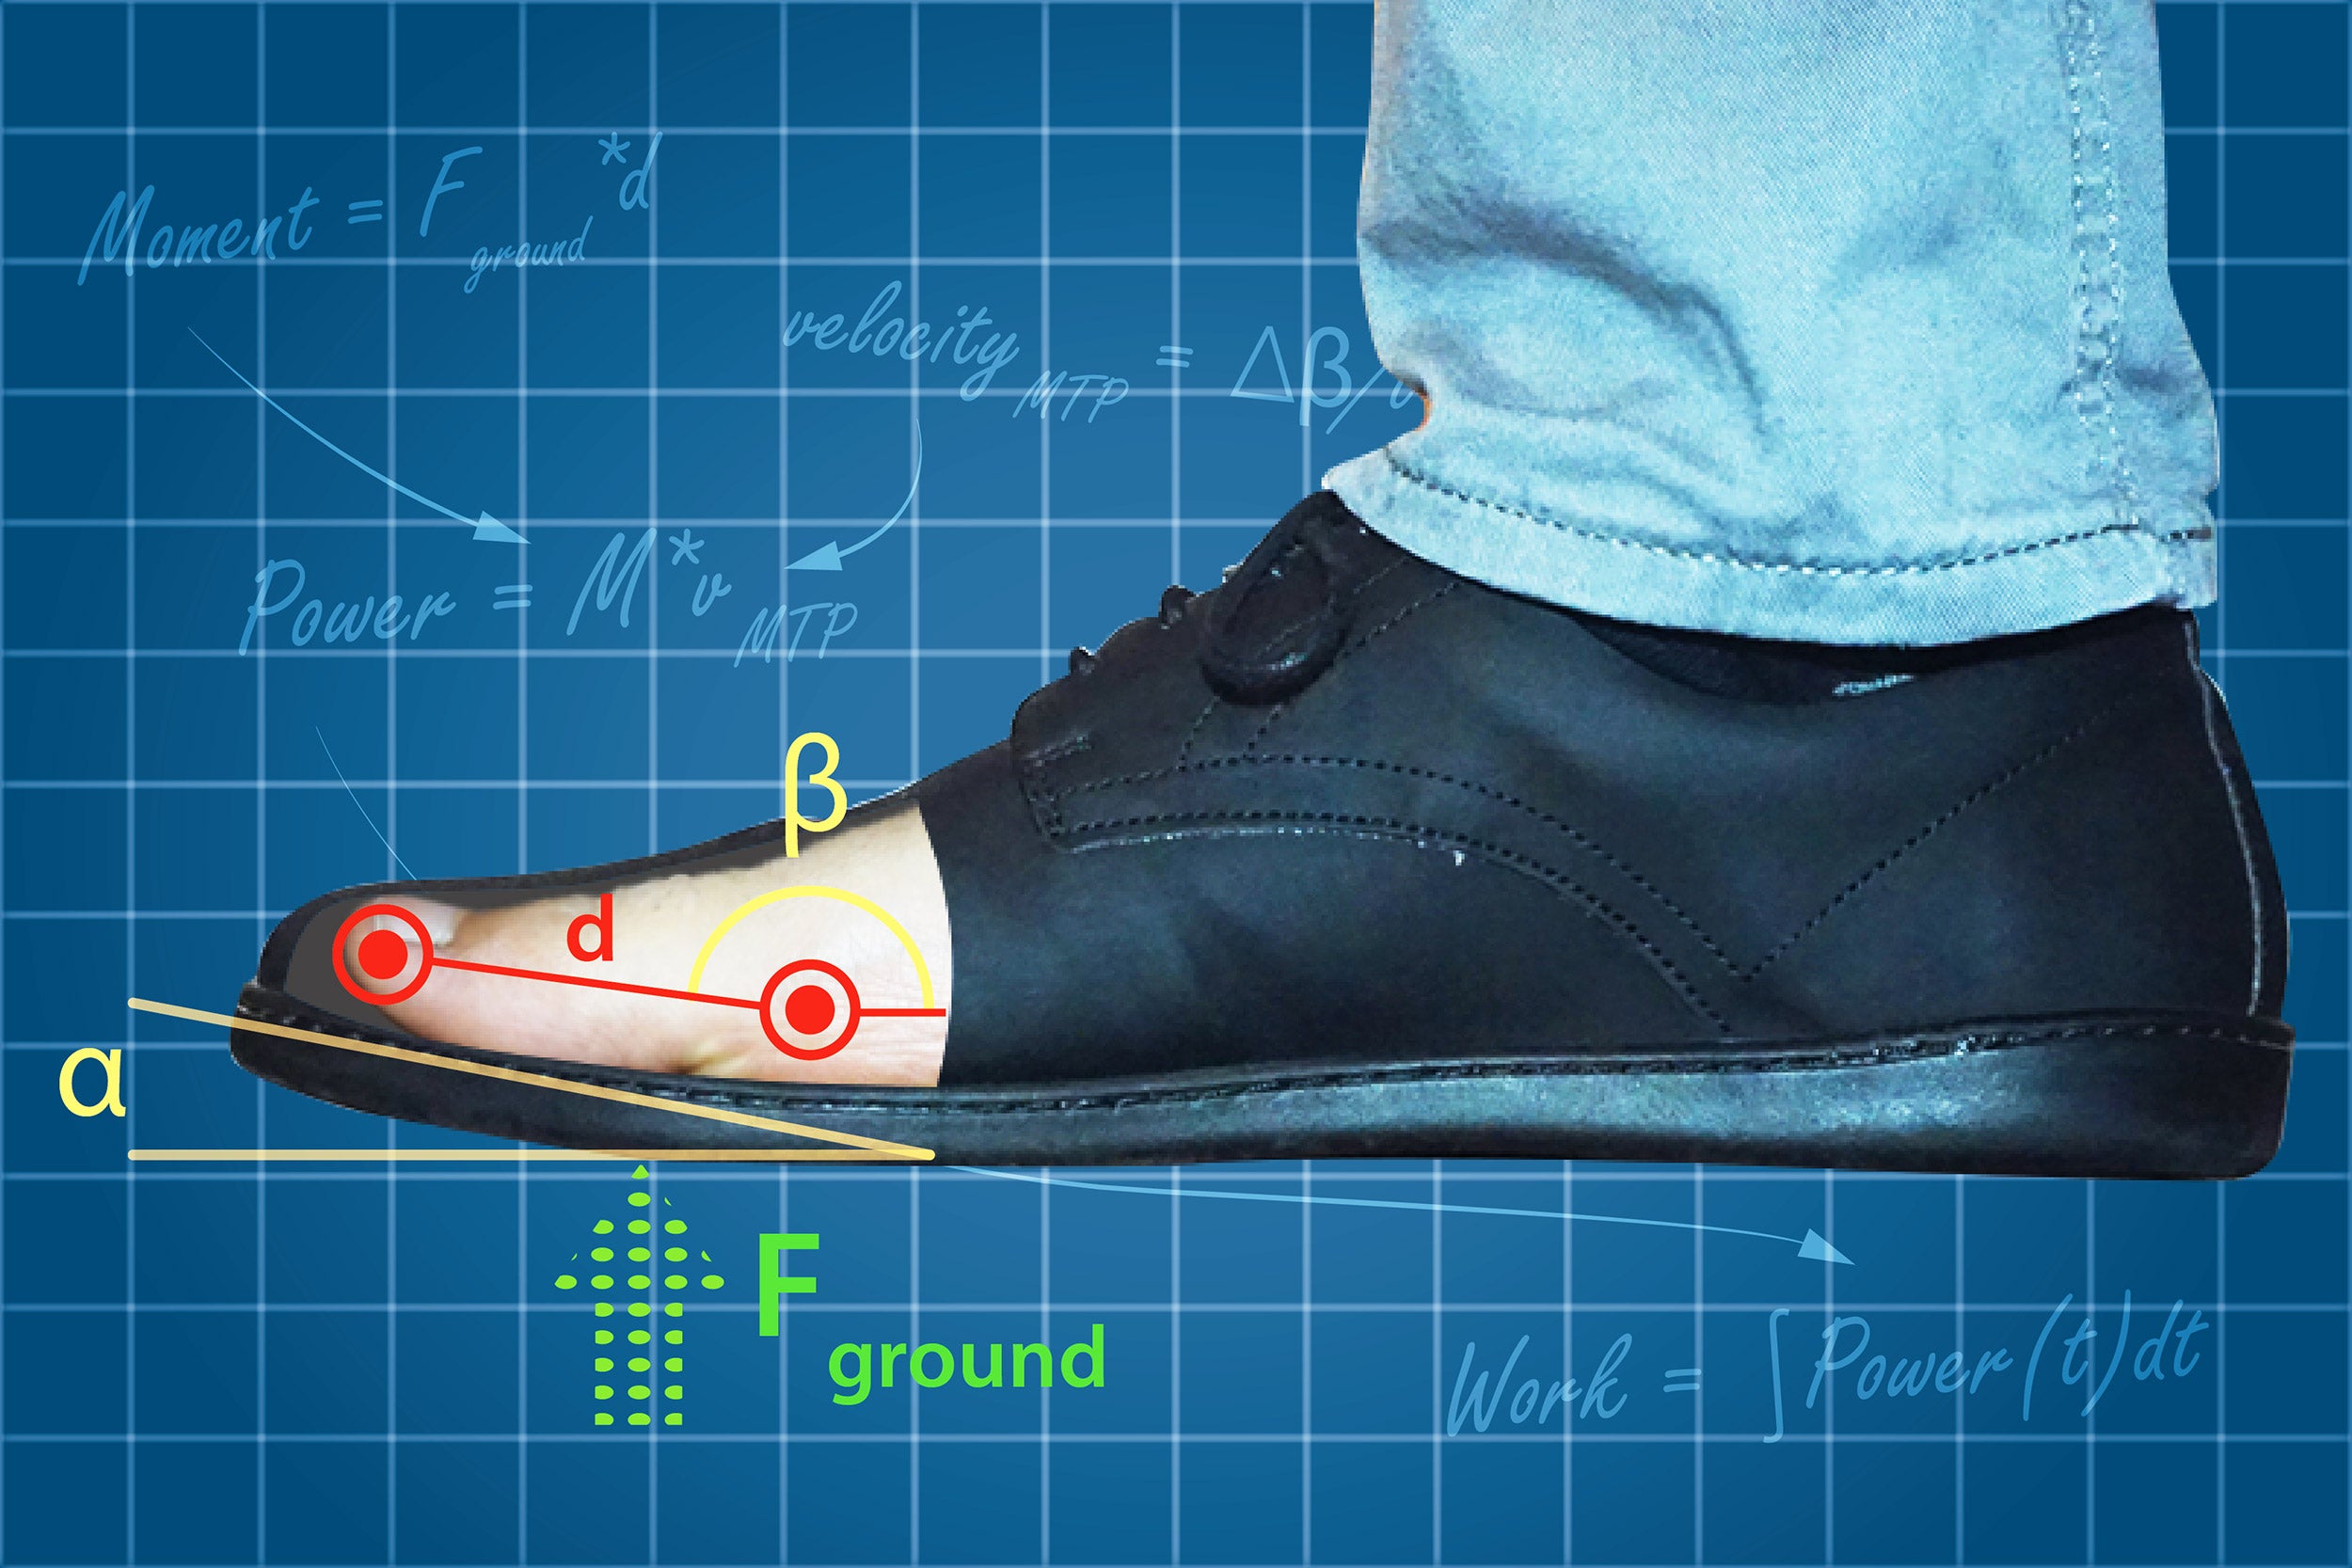 Curve on shoes makes walking easier, but may lead to foot problems